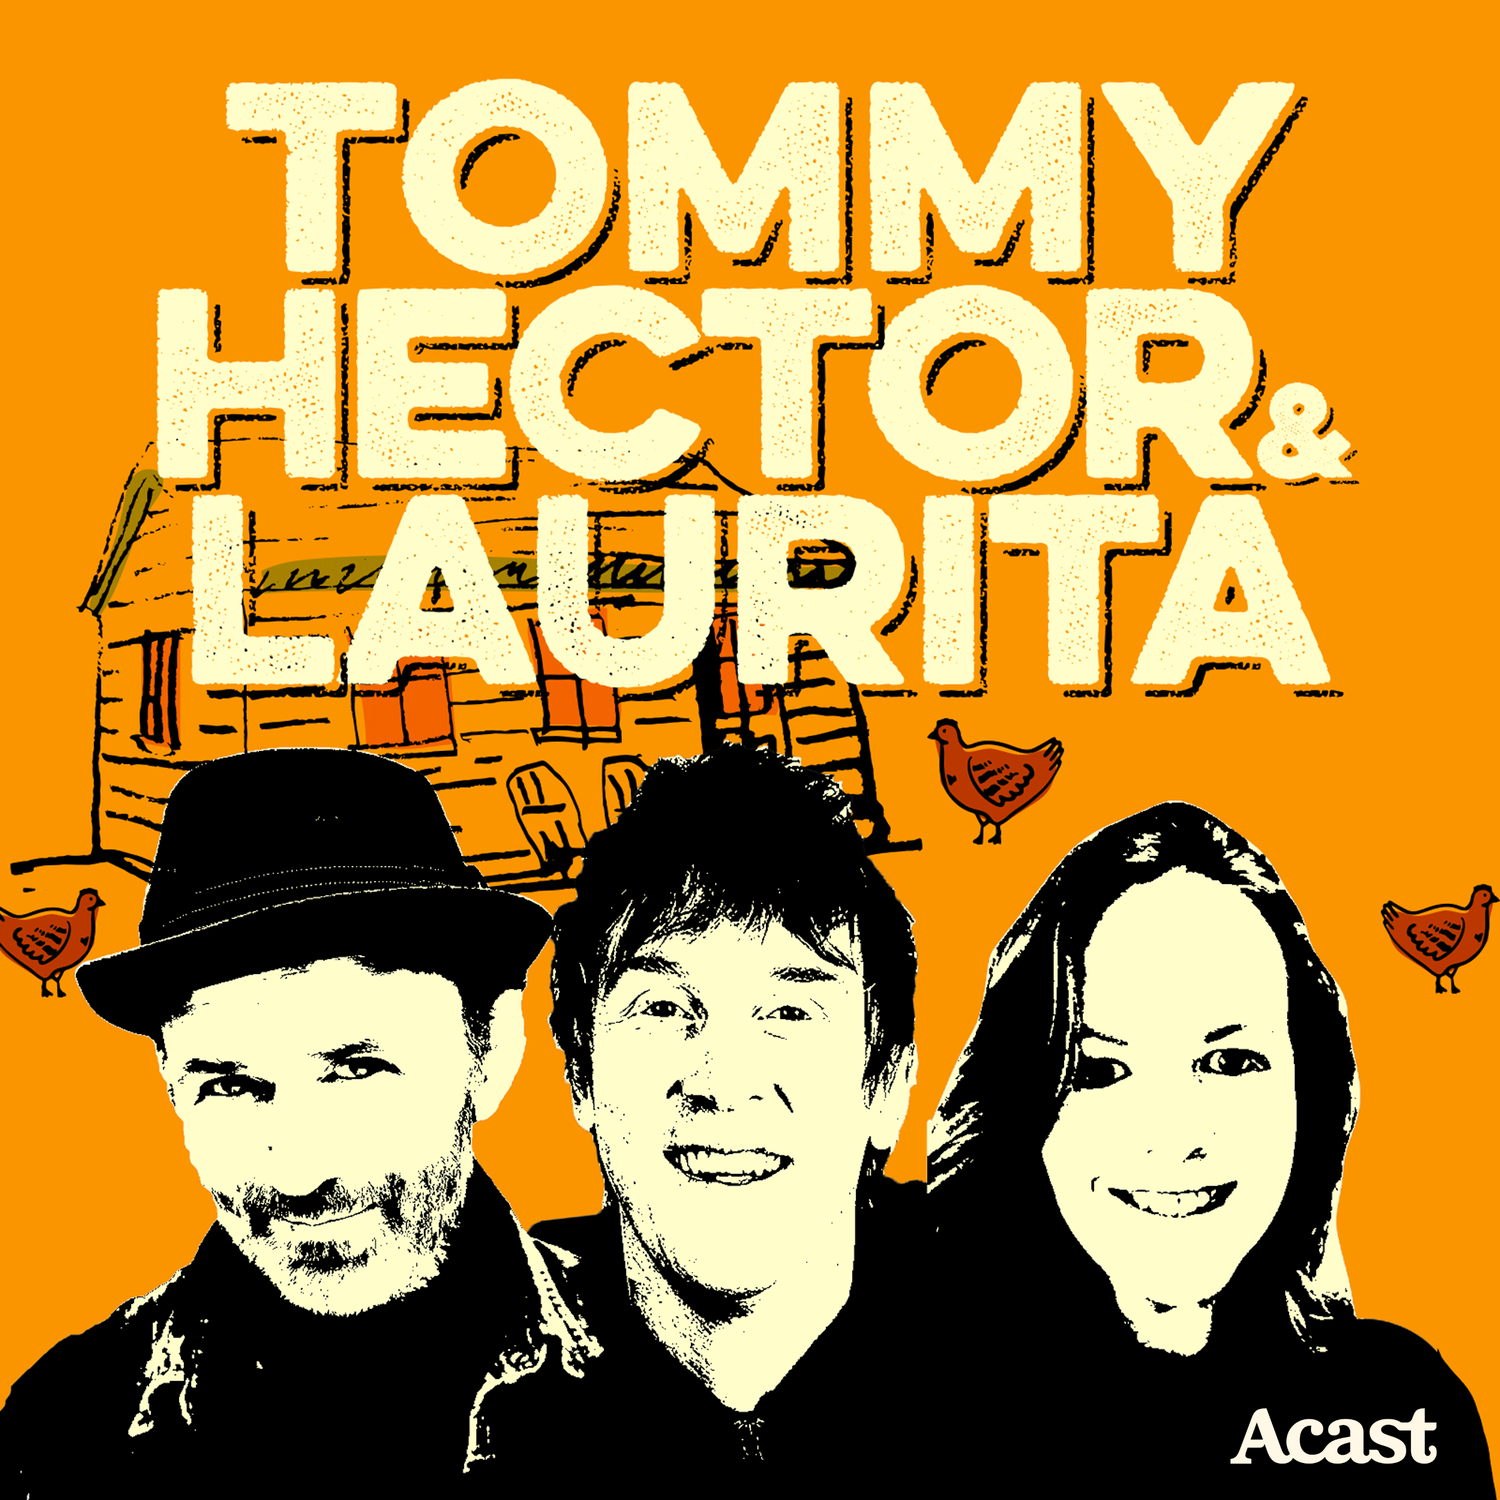 The Tommy, Hector & Laurita Podcast podcast show image